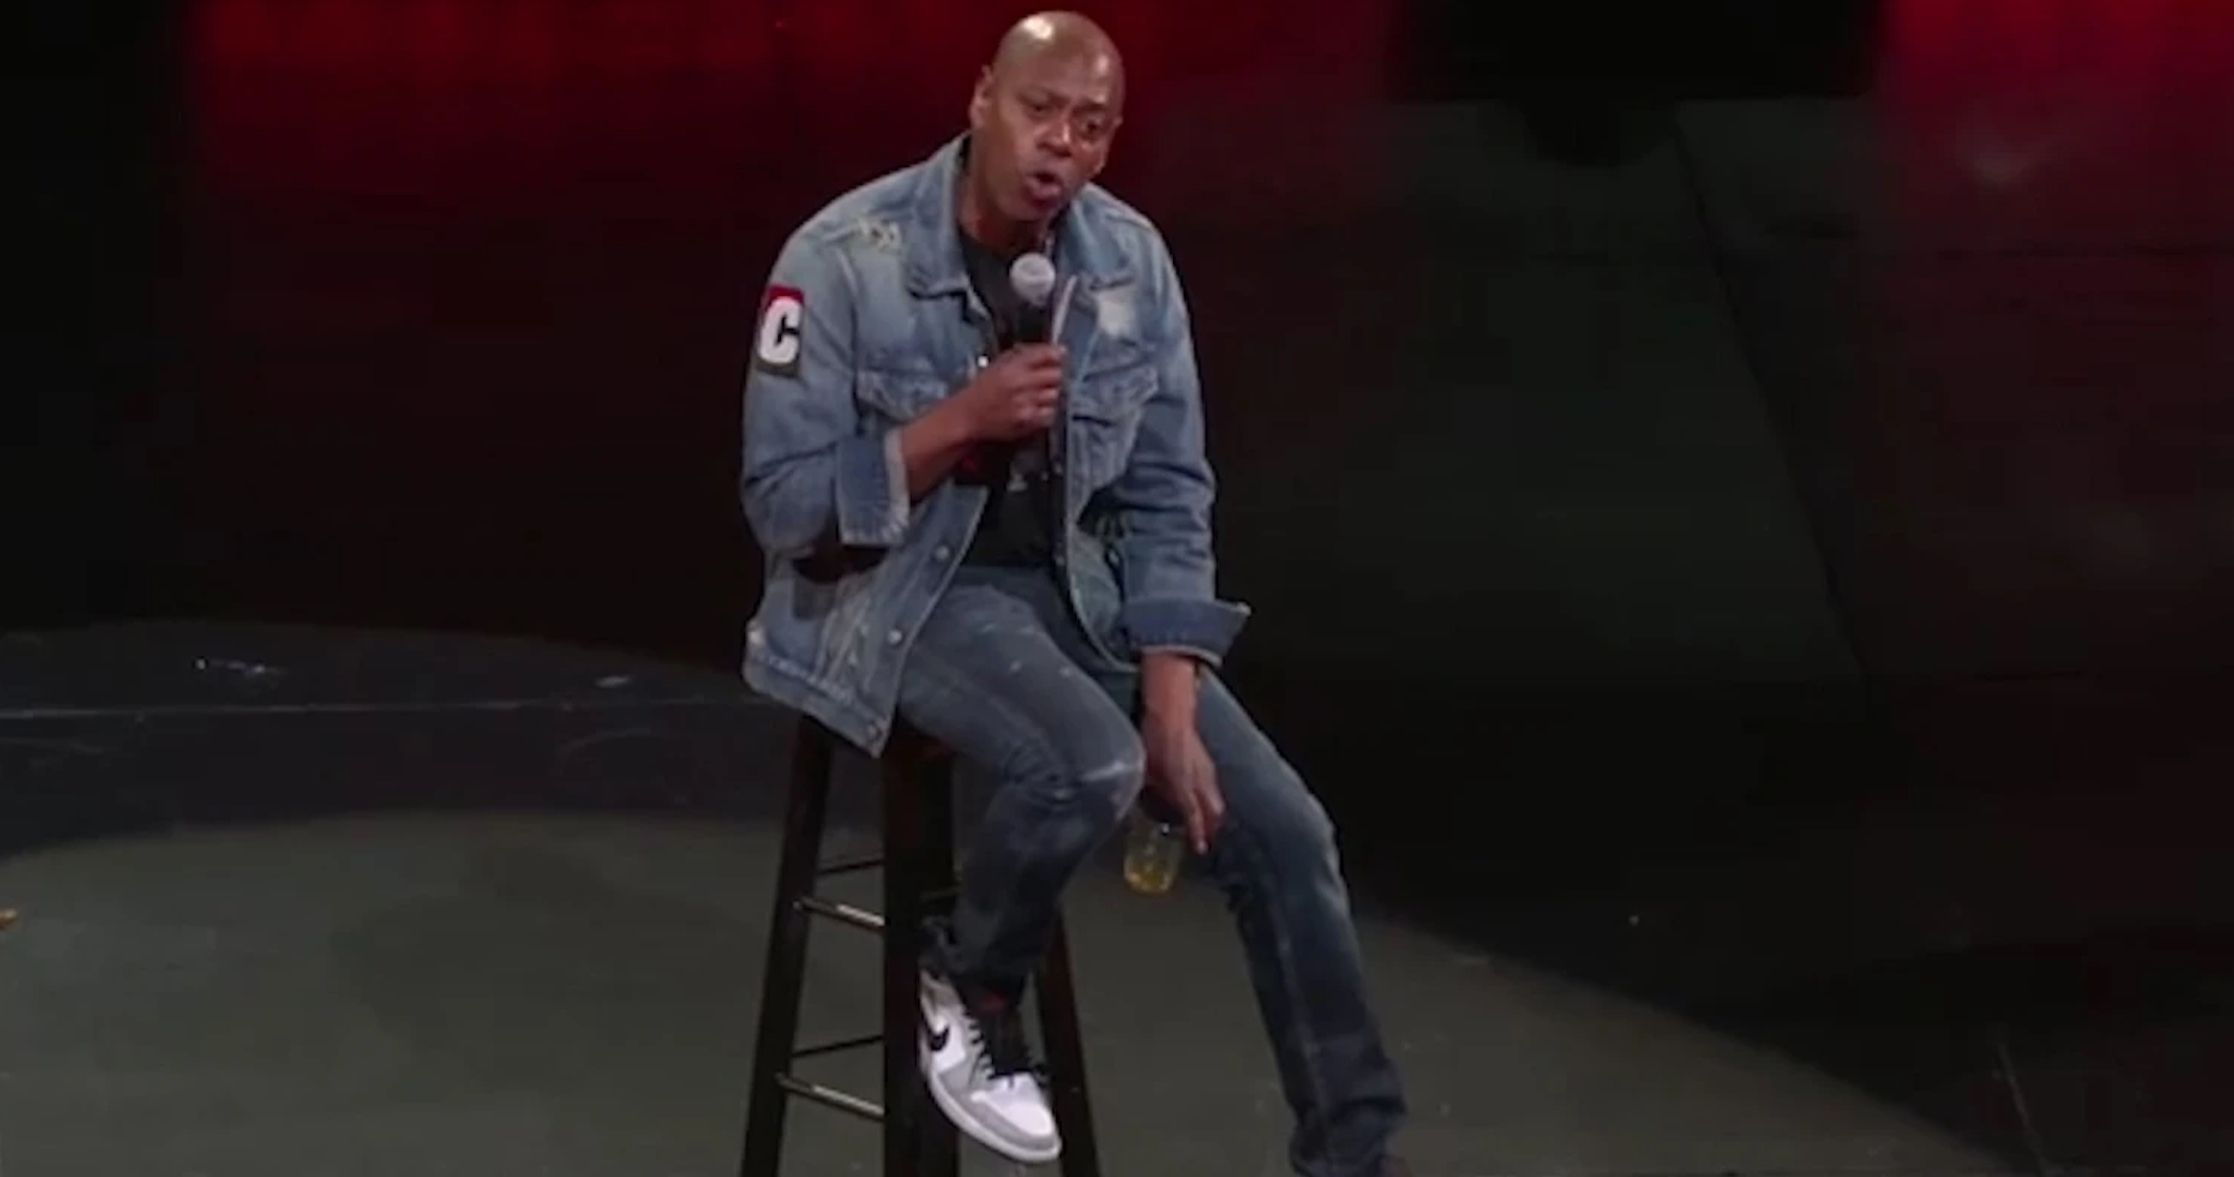 Caitlyn Jenner Defends Dave Chappelle Over The Closer Backlash, Says He's '100% Right'